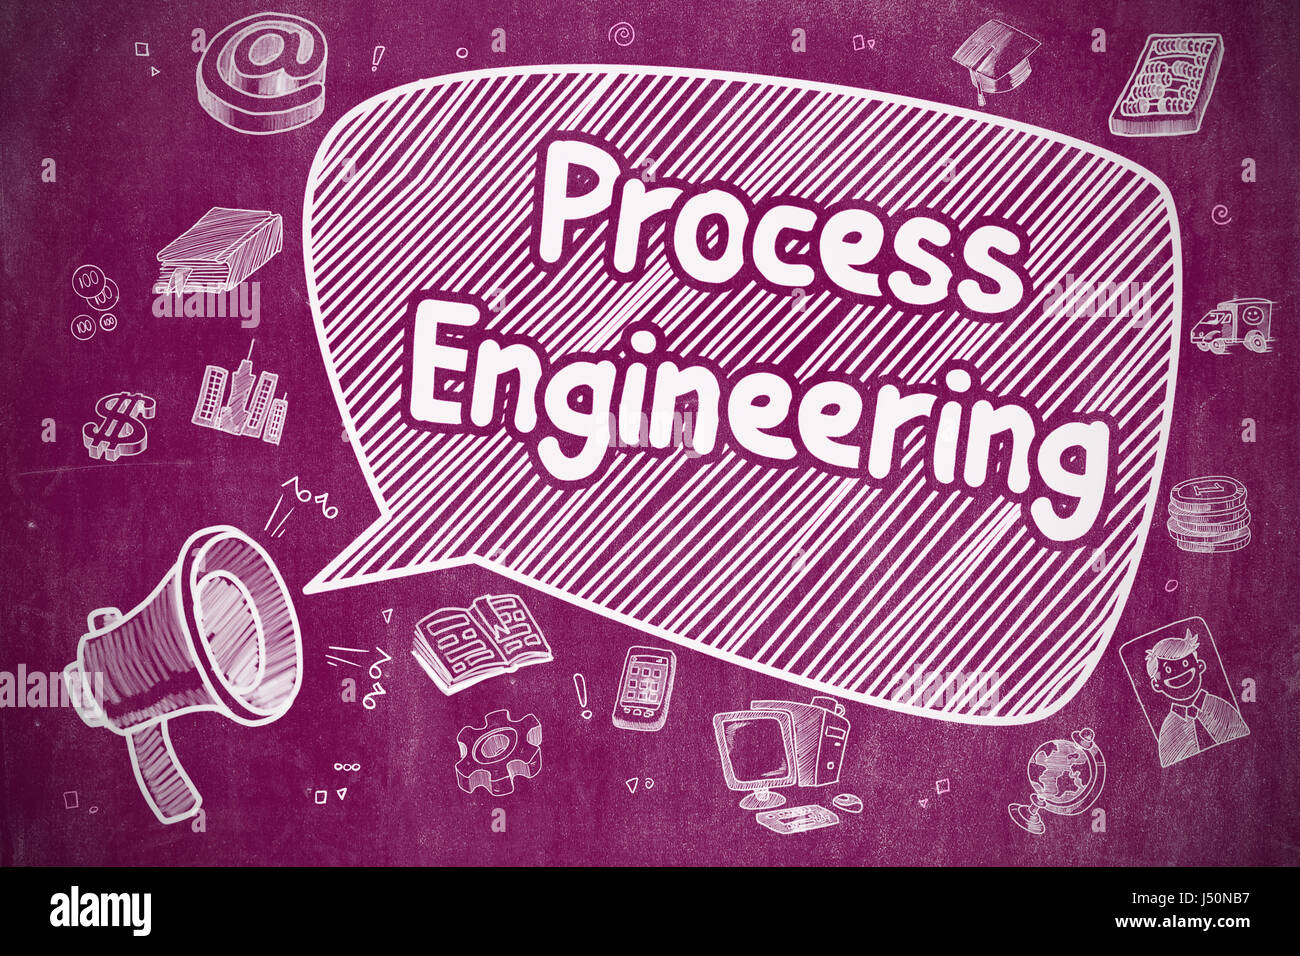 Process Engineering - Business Concept. Stock Photo